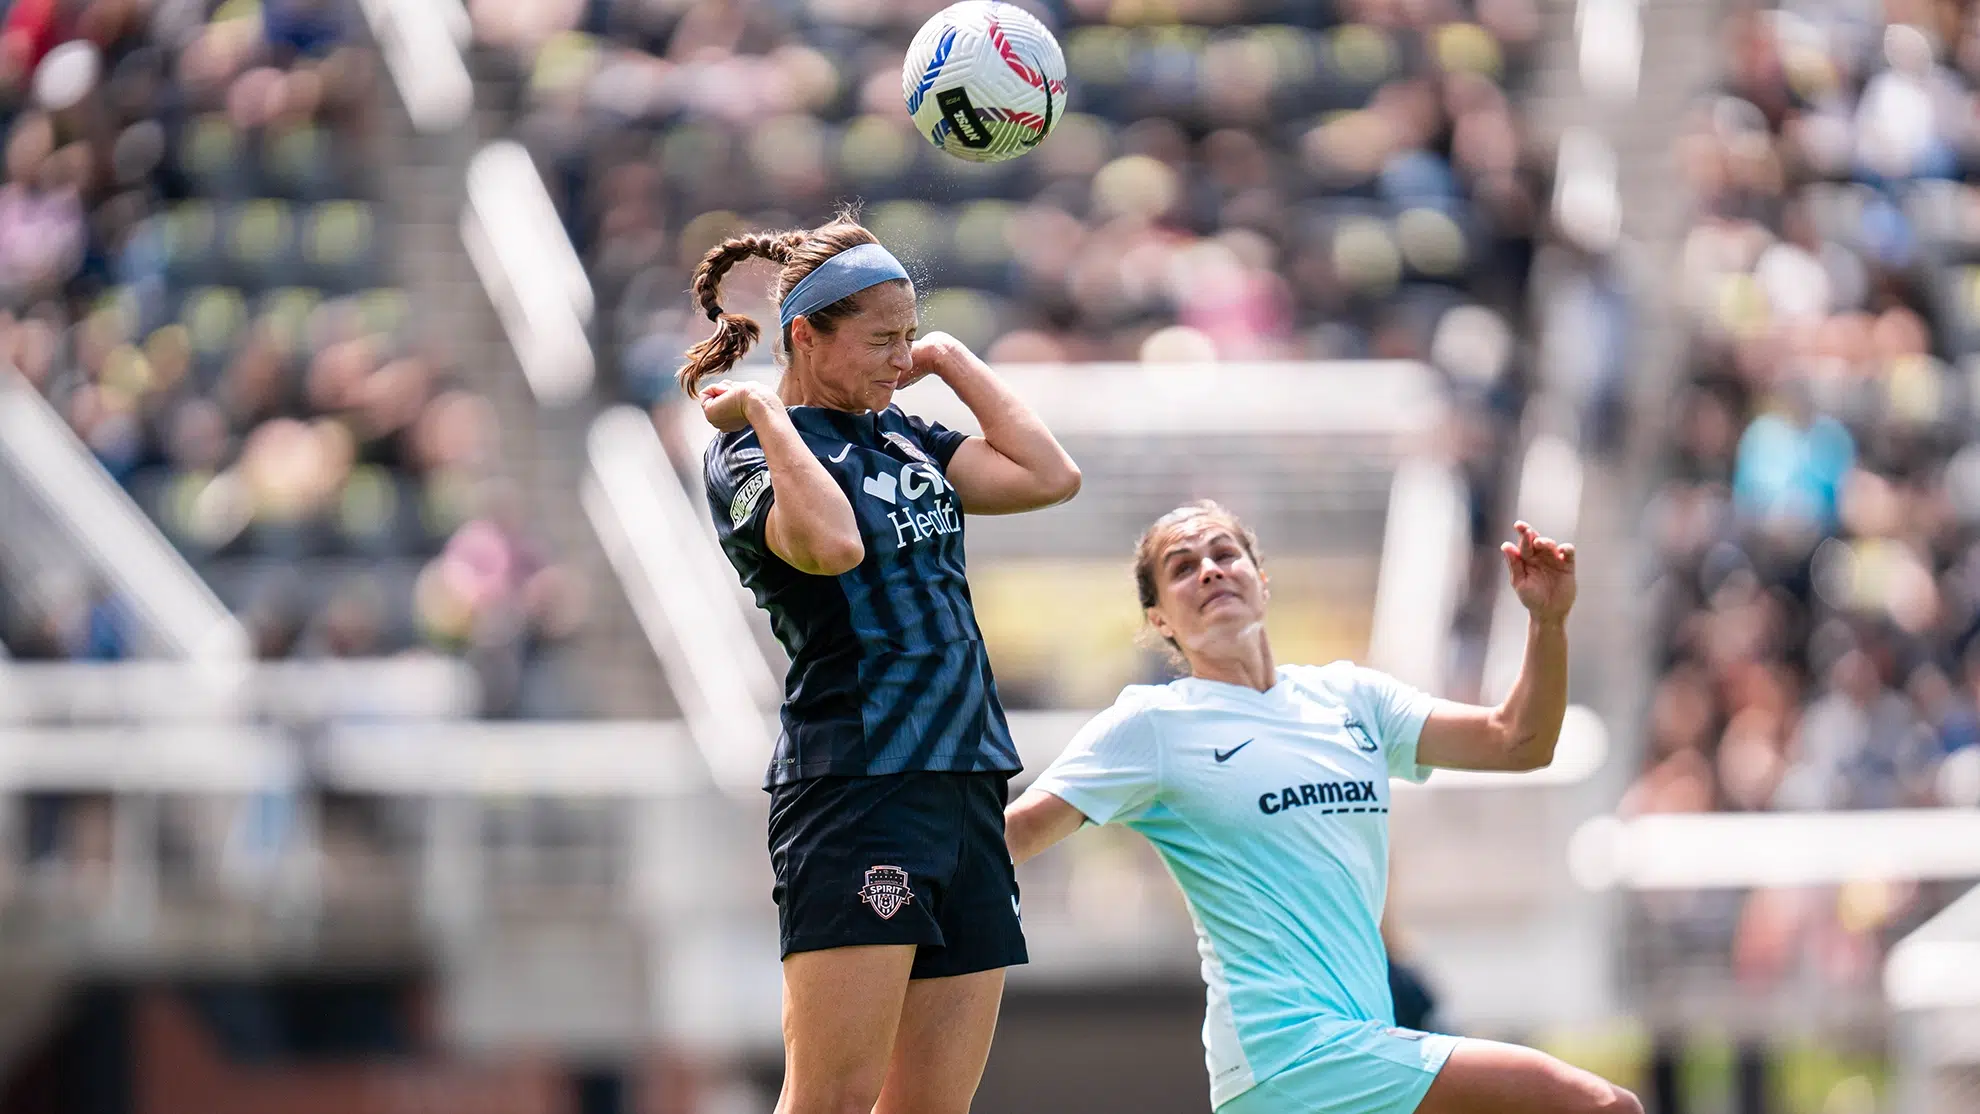 Ashley Hatch jumps up to head a soccer ball while a Gotham defender is seen below. Ashley Hatch is wearing a black Spirit kit with her hair in a braid.